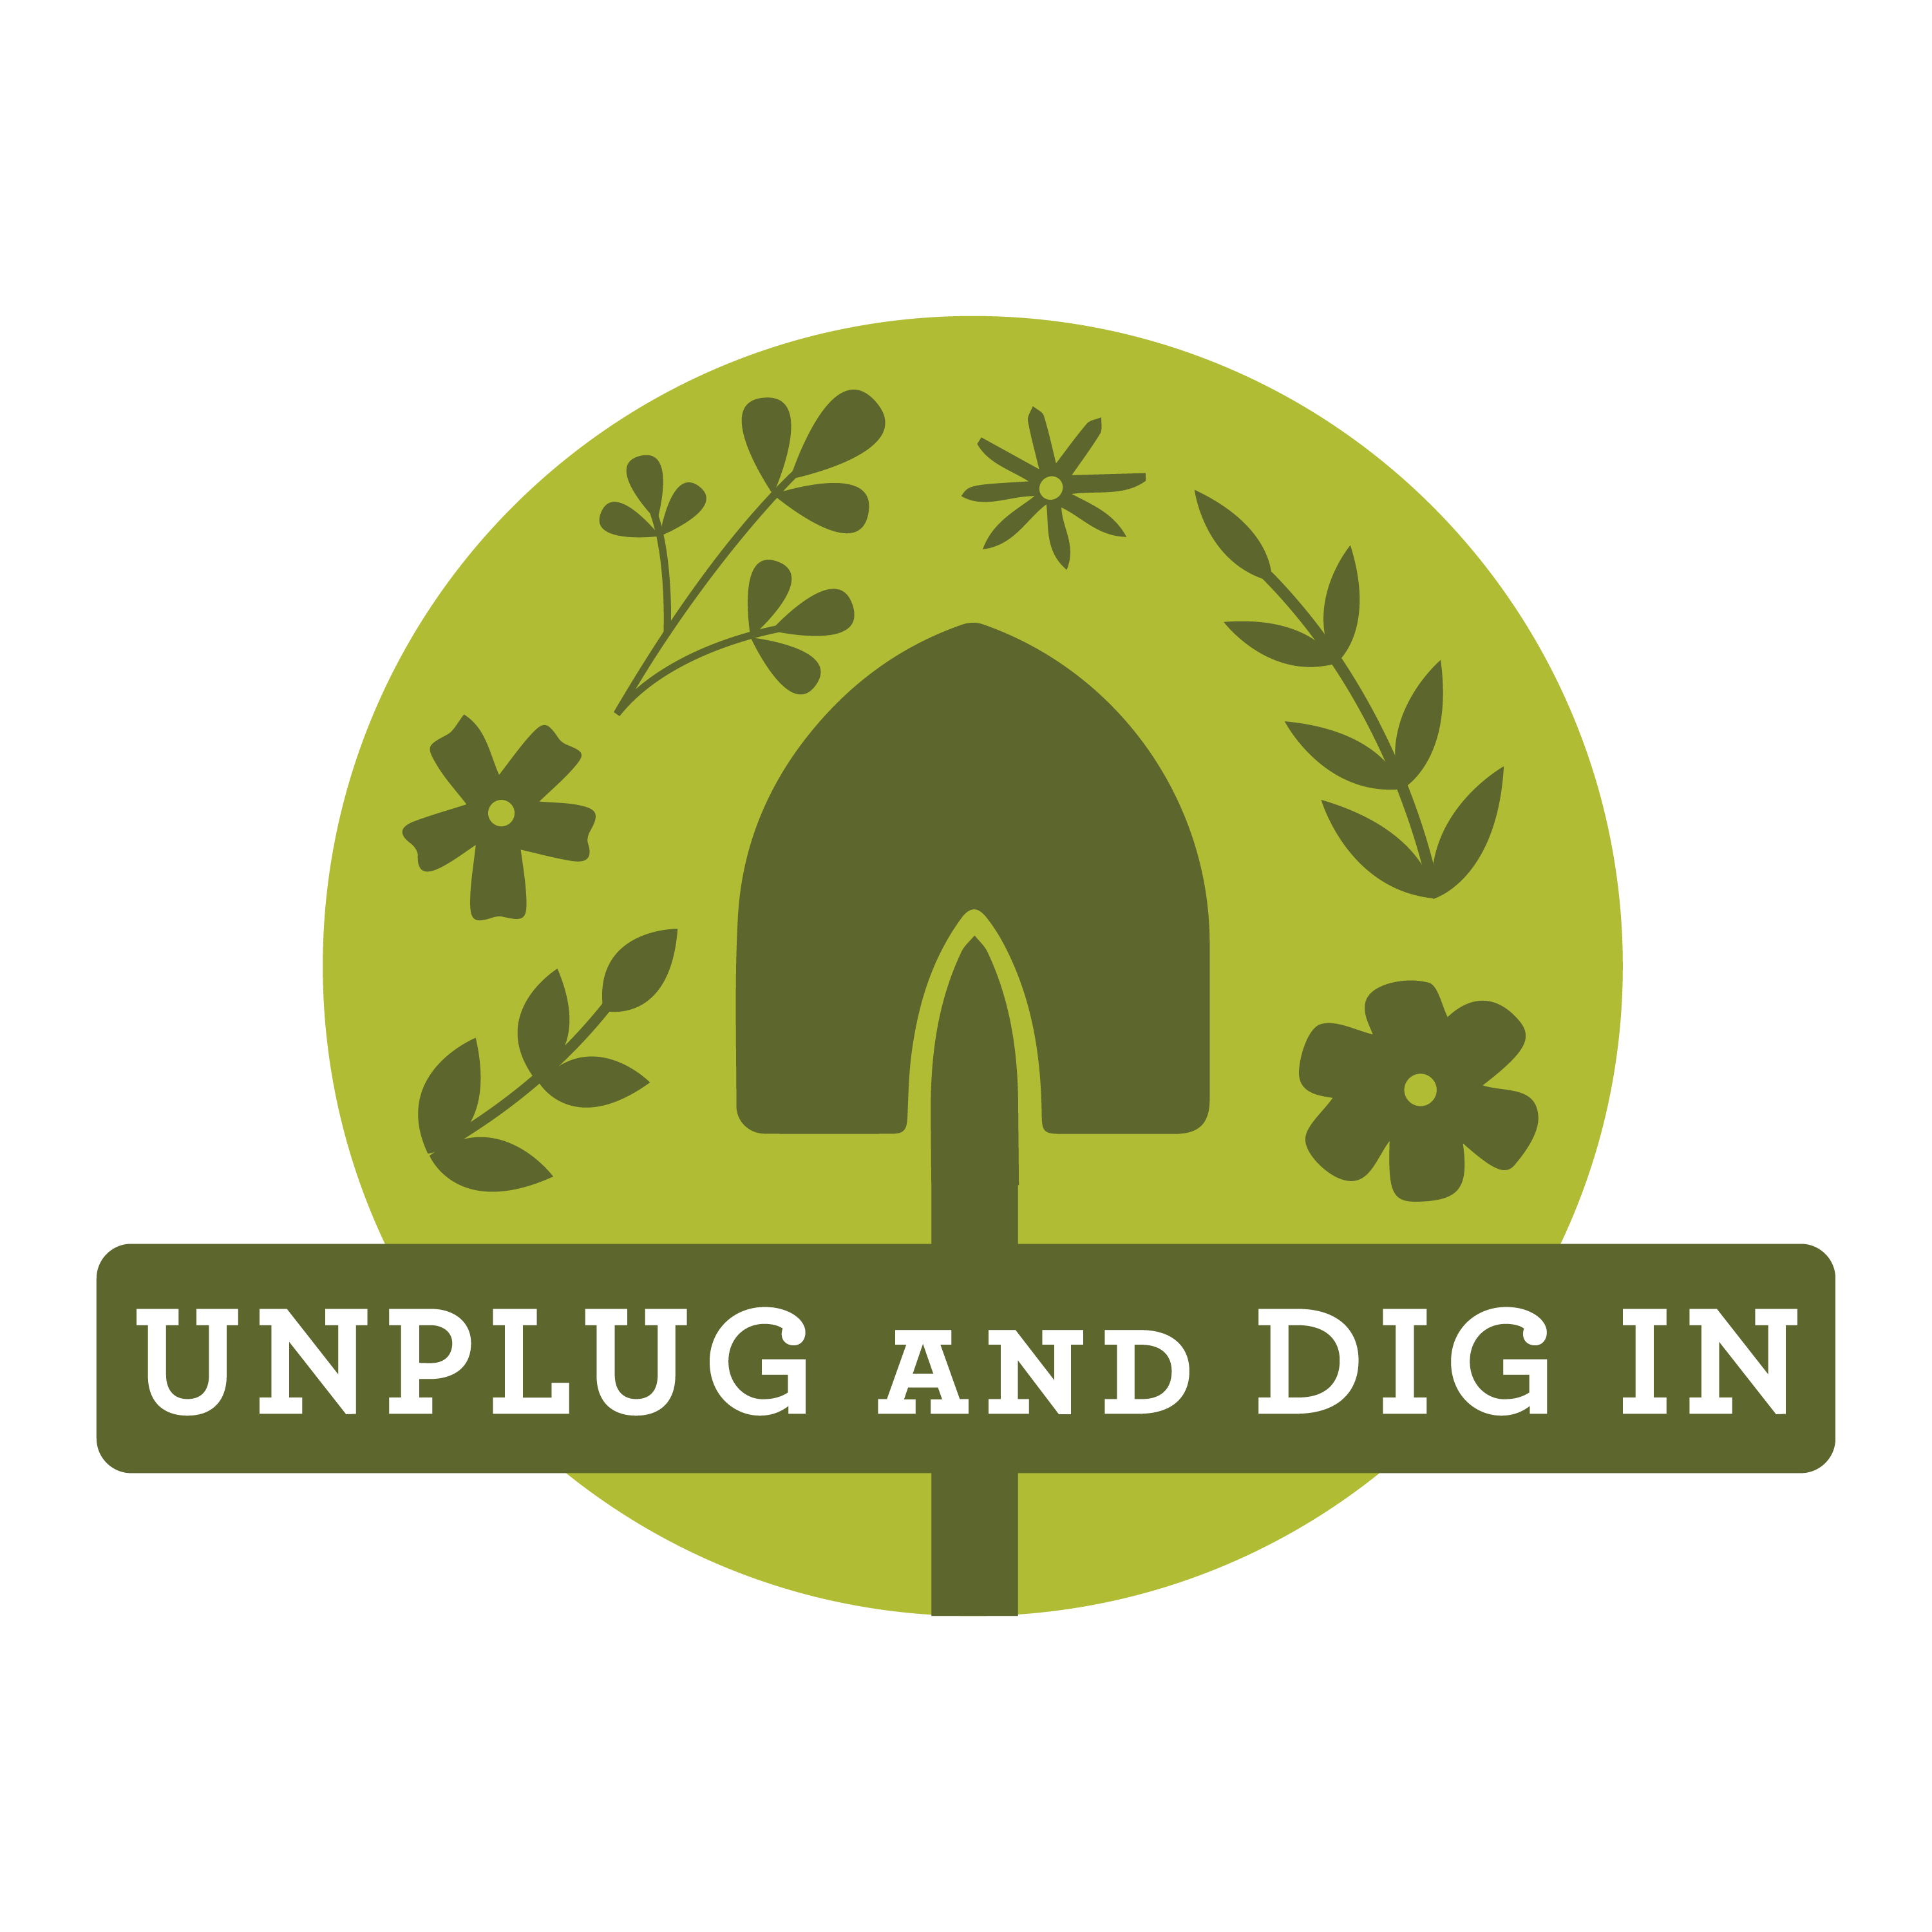 Open the Unplug and Dig In logo graphic